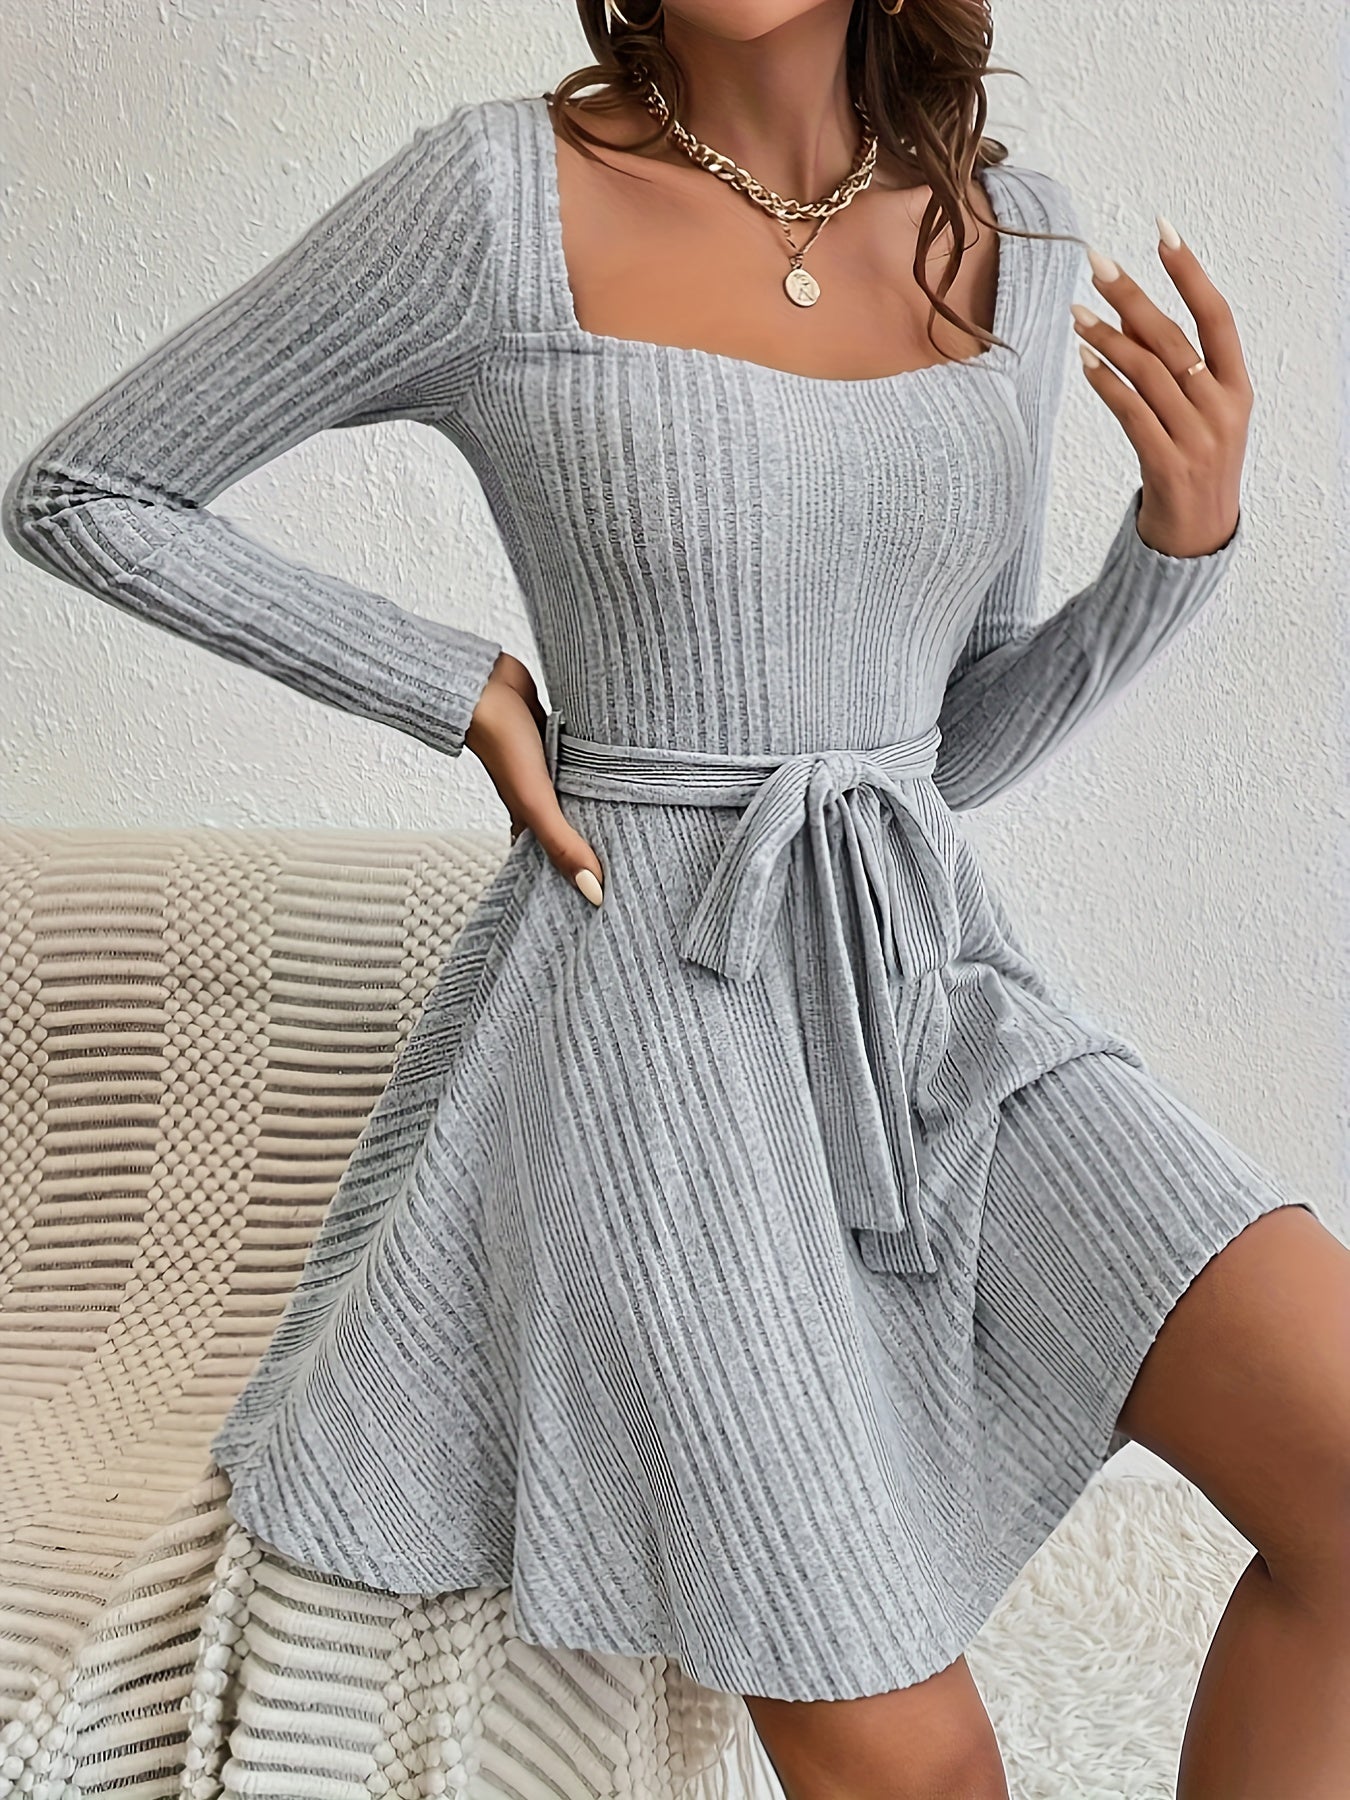 Antmvs Long Sleeve Ribbed Knit Dress, Casual Tie-waist Square Neck Dress For Spring & Fall, Women's Clothing